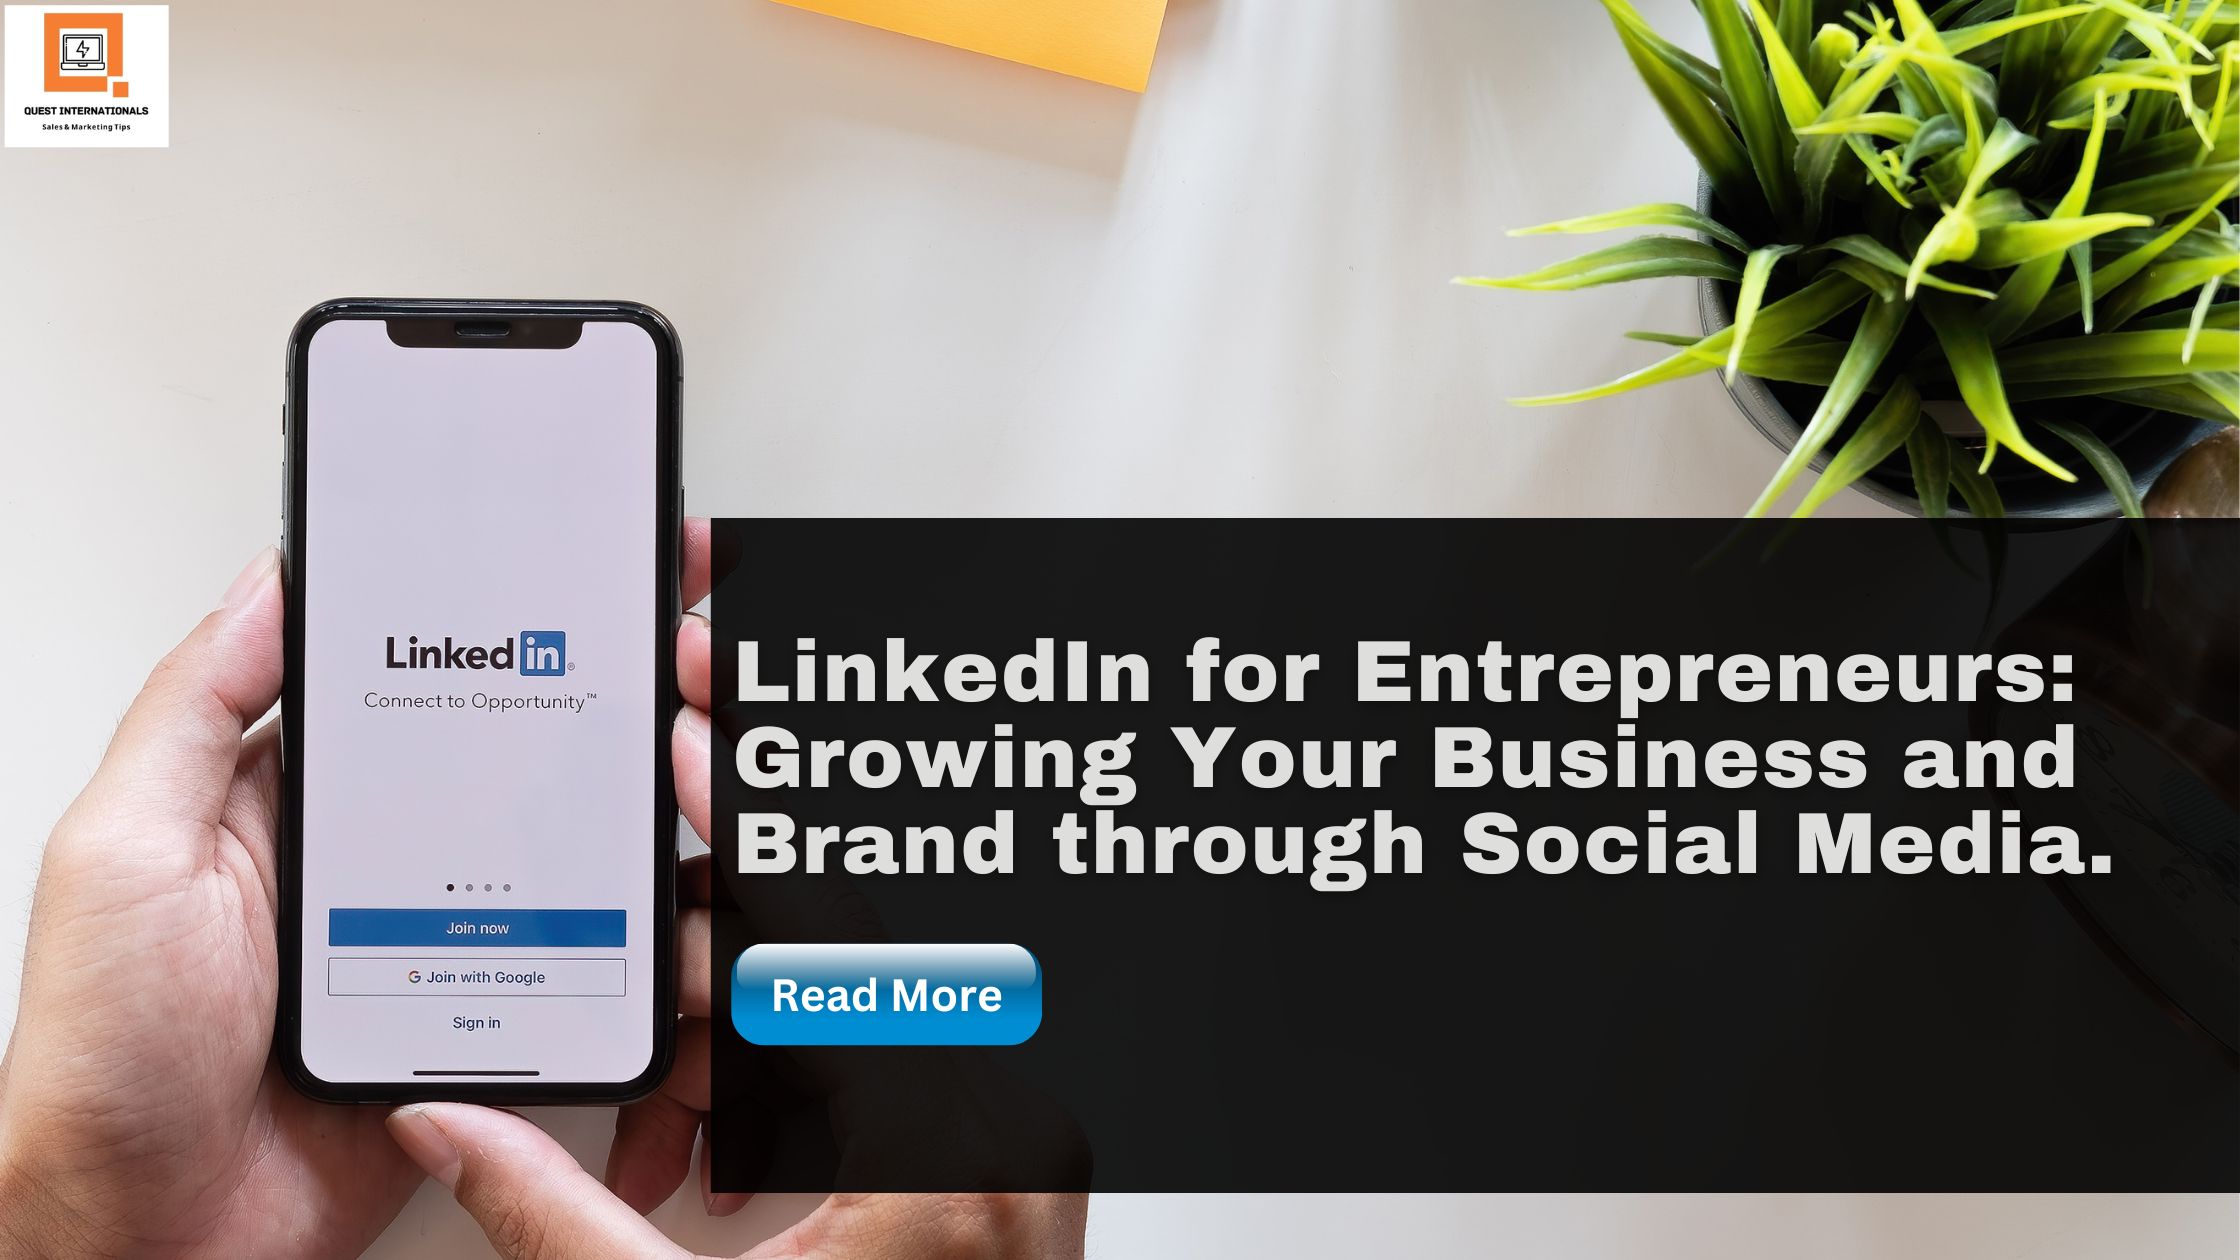 You are currently viewing LinkedIn for Entrepreneurs: Growing Your Business and Brand through Social Media.